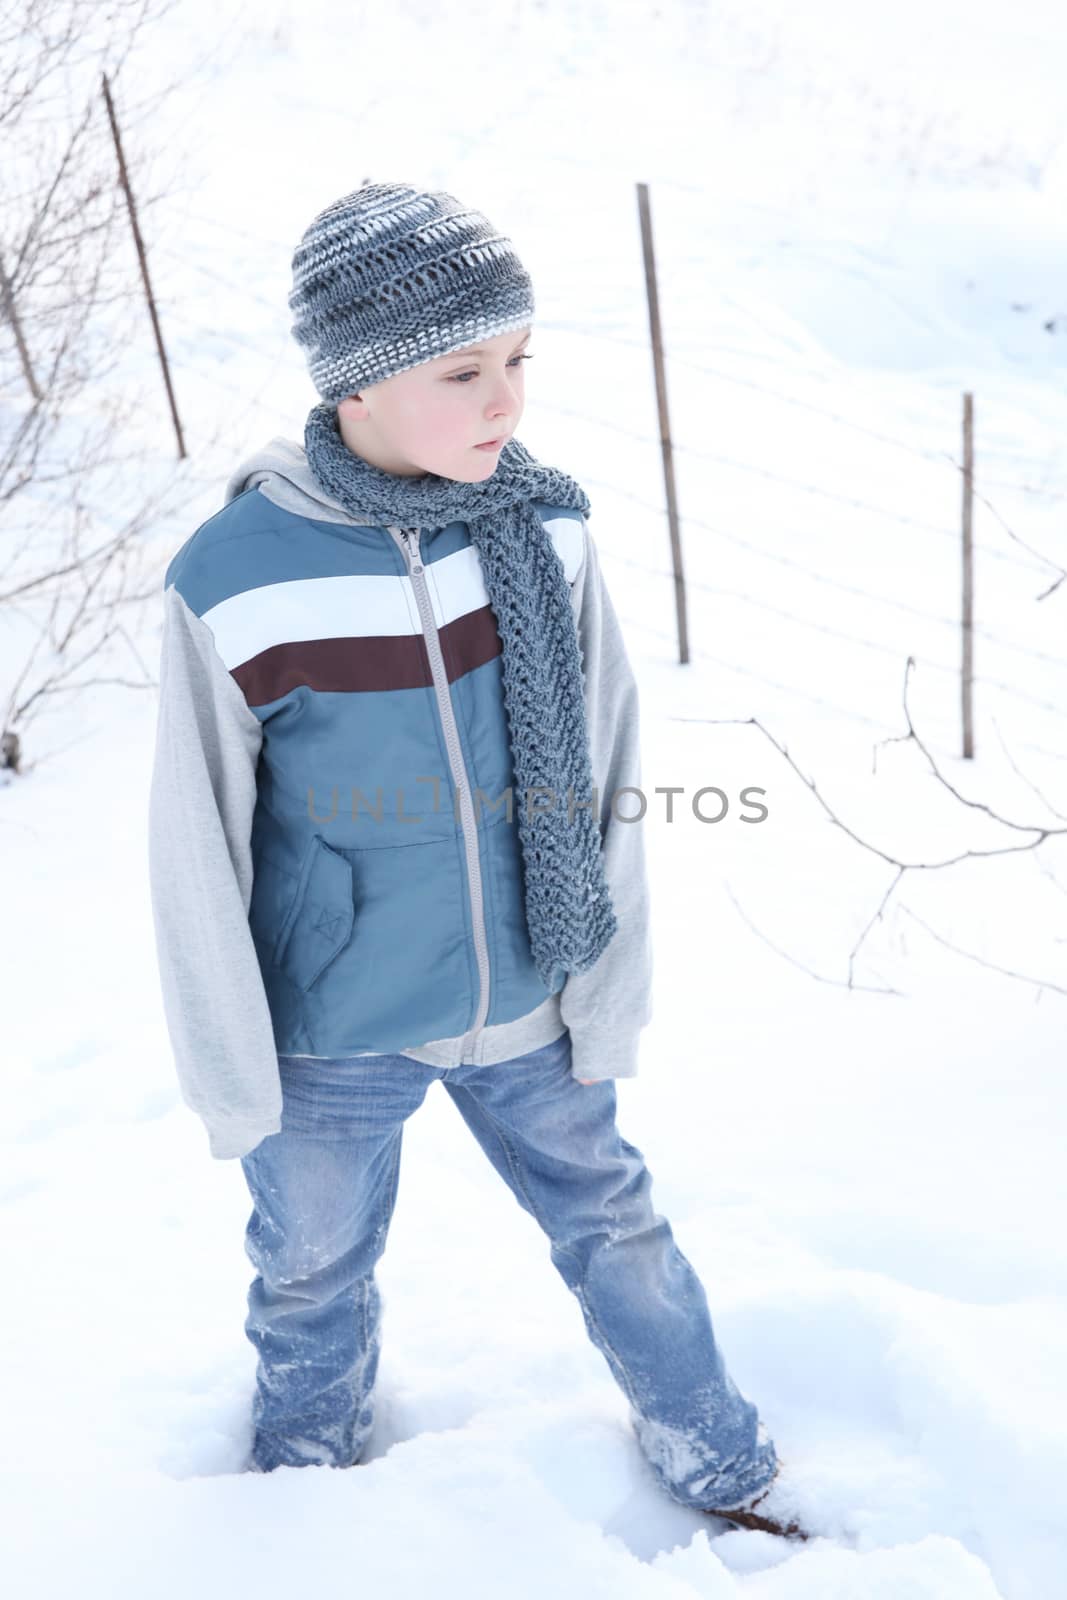 Young boy outside in the snow wearing blue